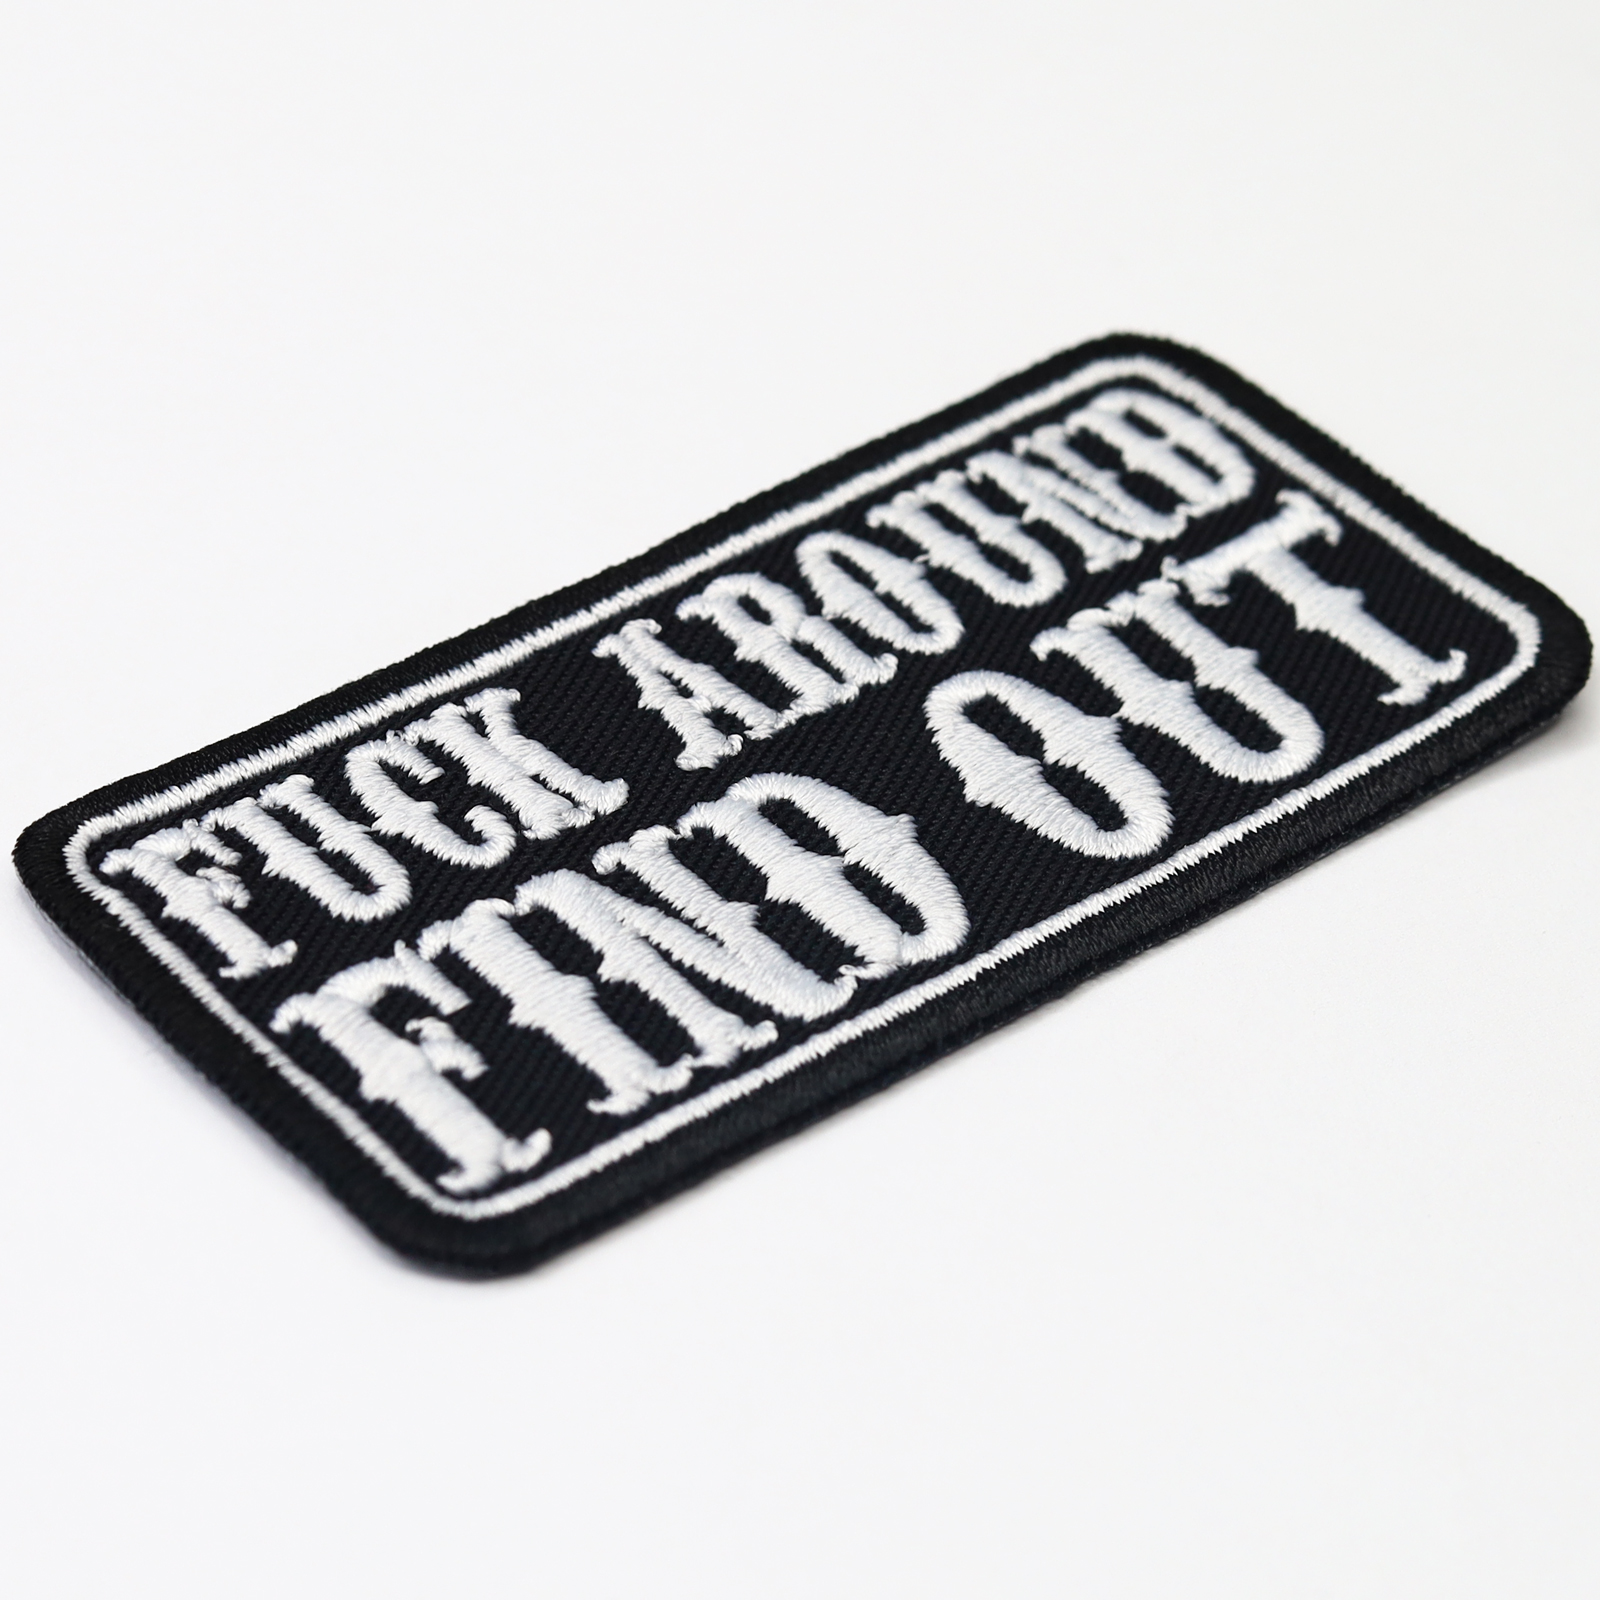 Fuck around find out - Patch